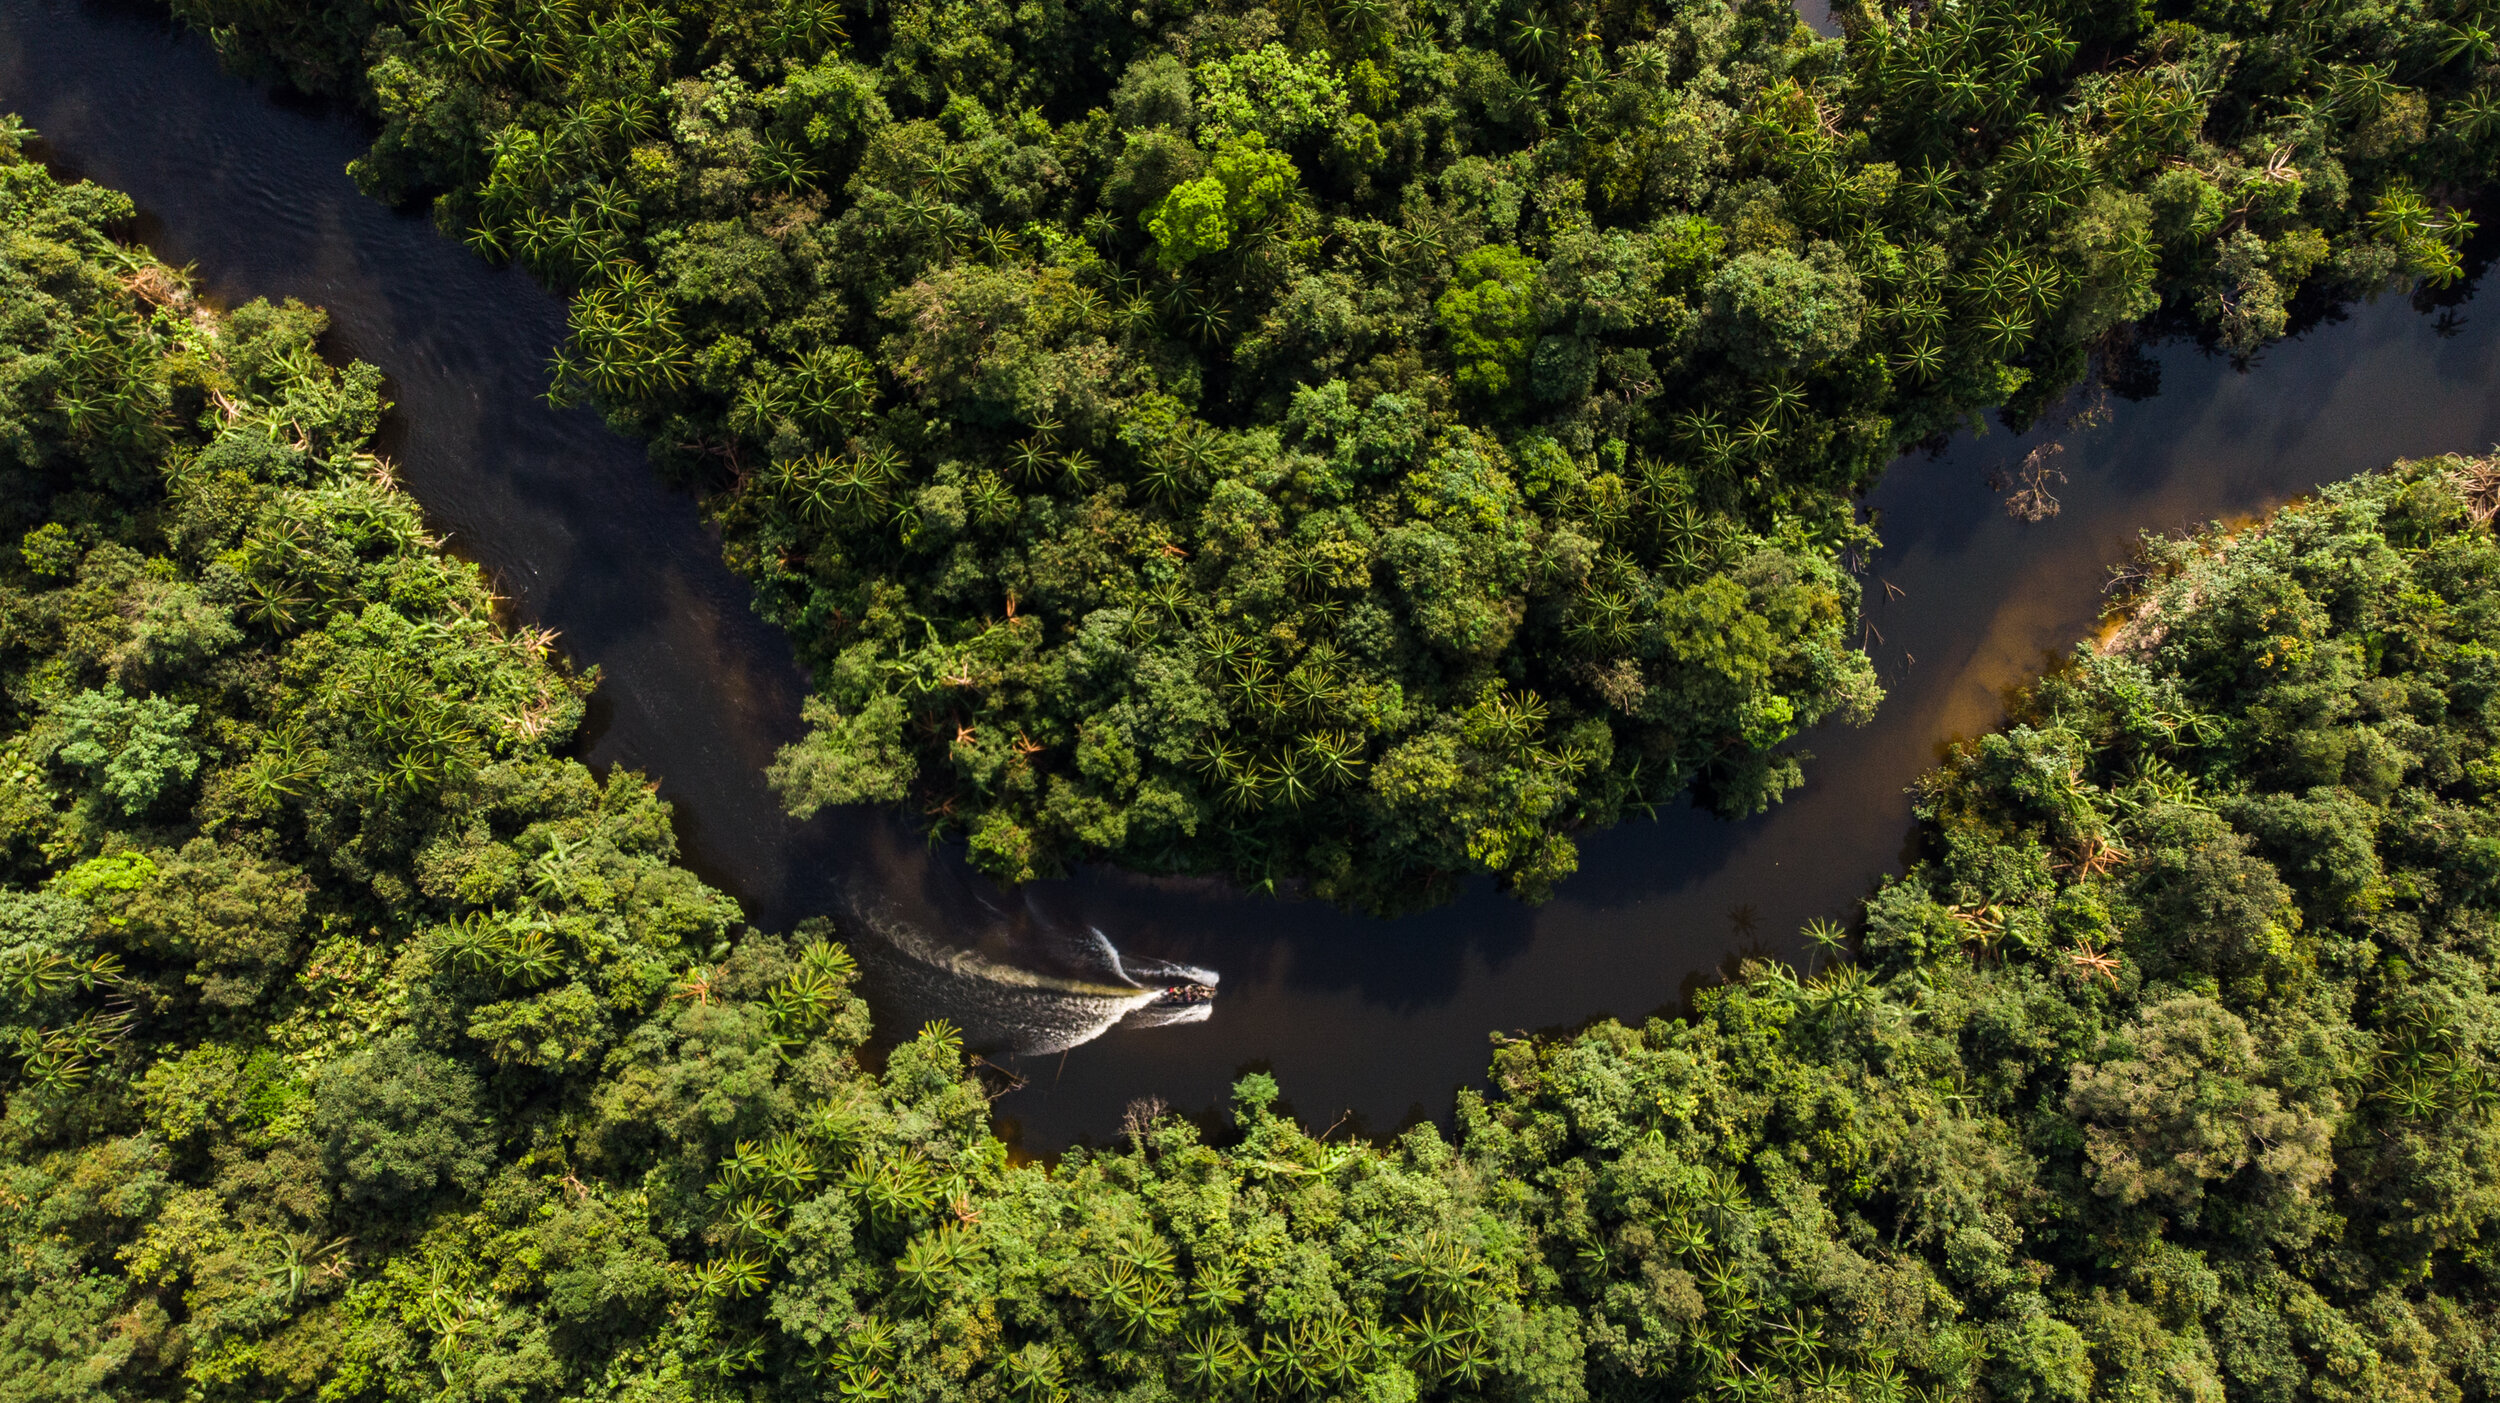  An aerial view of Wildlife Alliance rangers on the Preak Stung Proat river as they head by boat to the starting point of their overnight long patrol, deep inside the Cardamom Forest. Their objective is to trek through the forest back to their statio